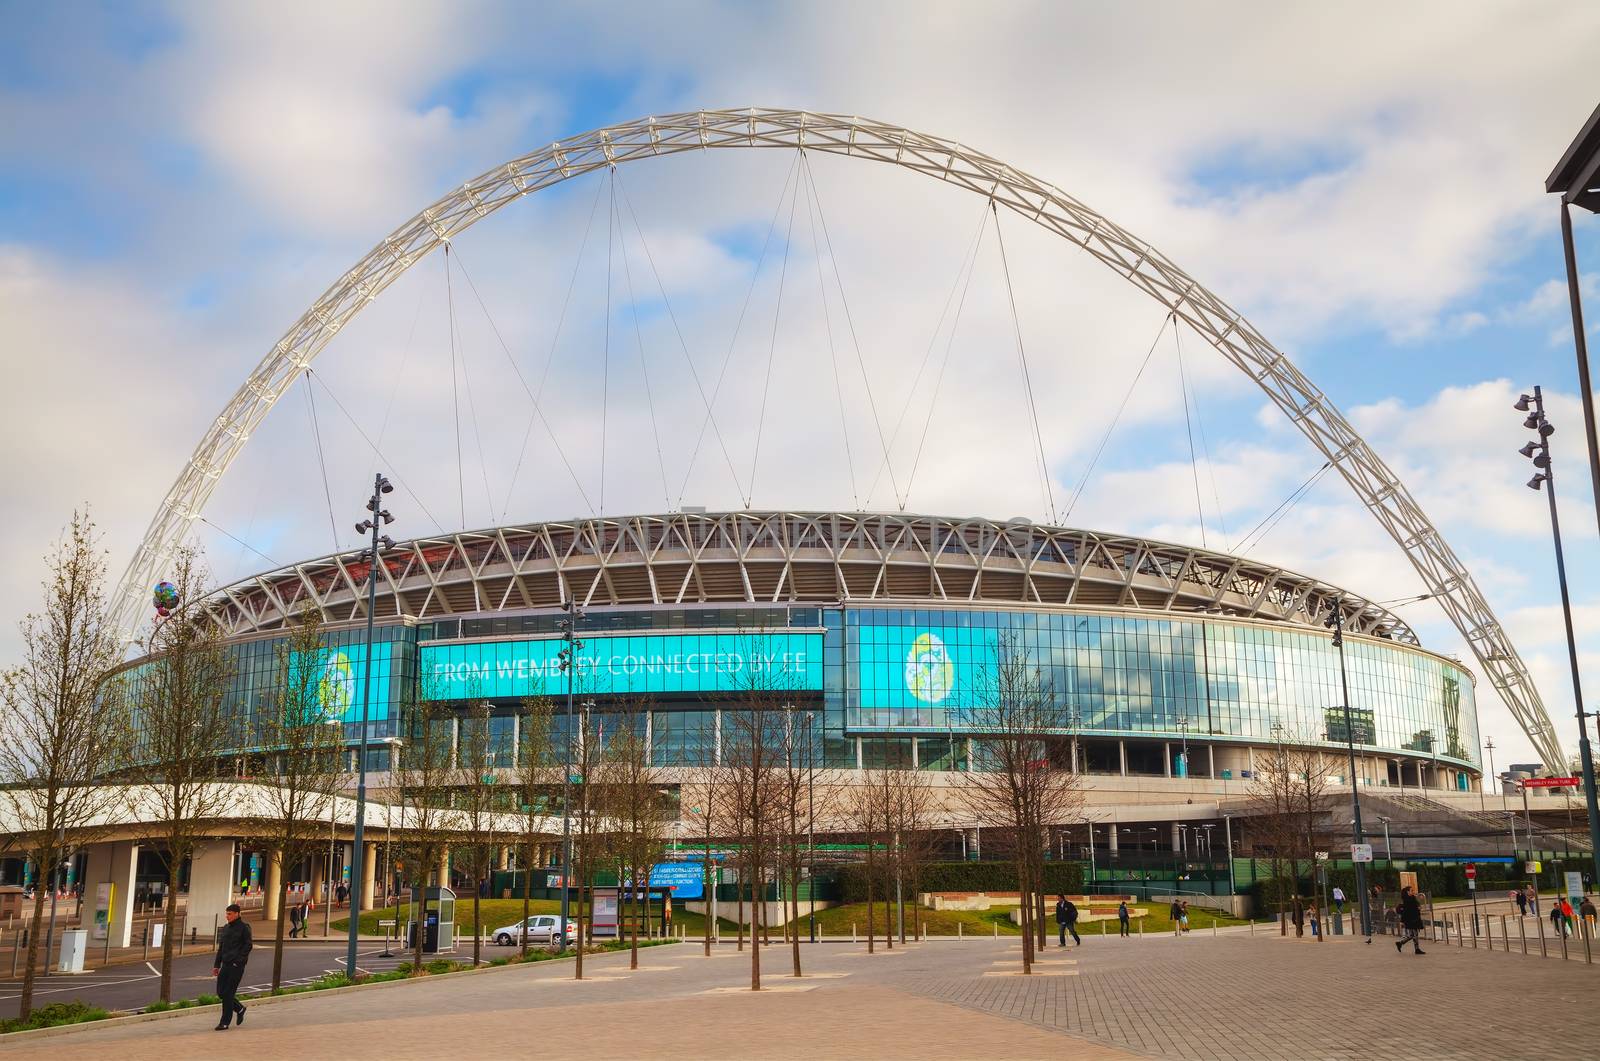 Wembley stadium in London, UK by AndreyKr